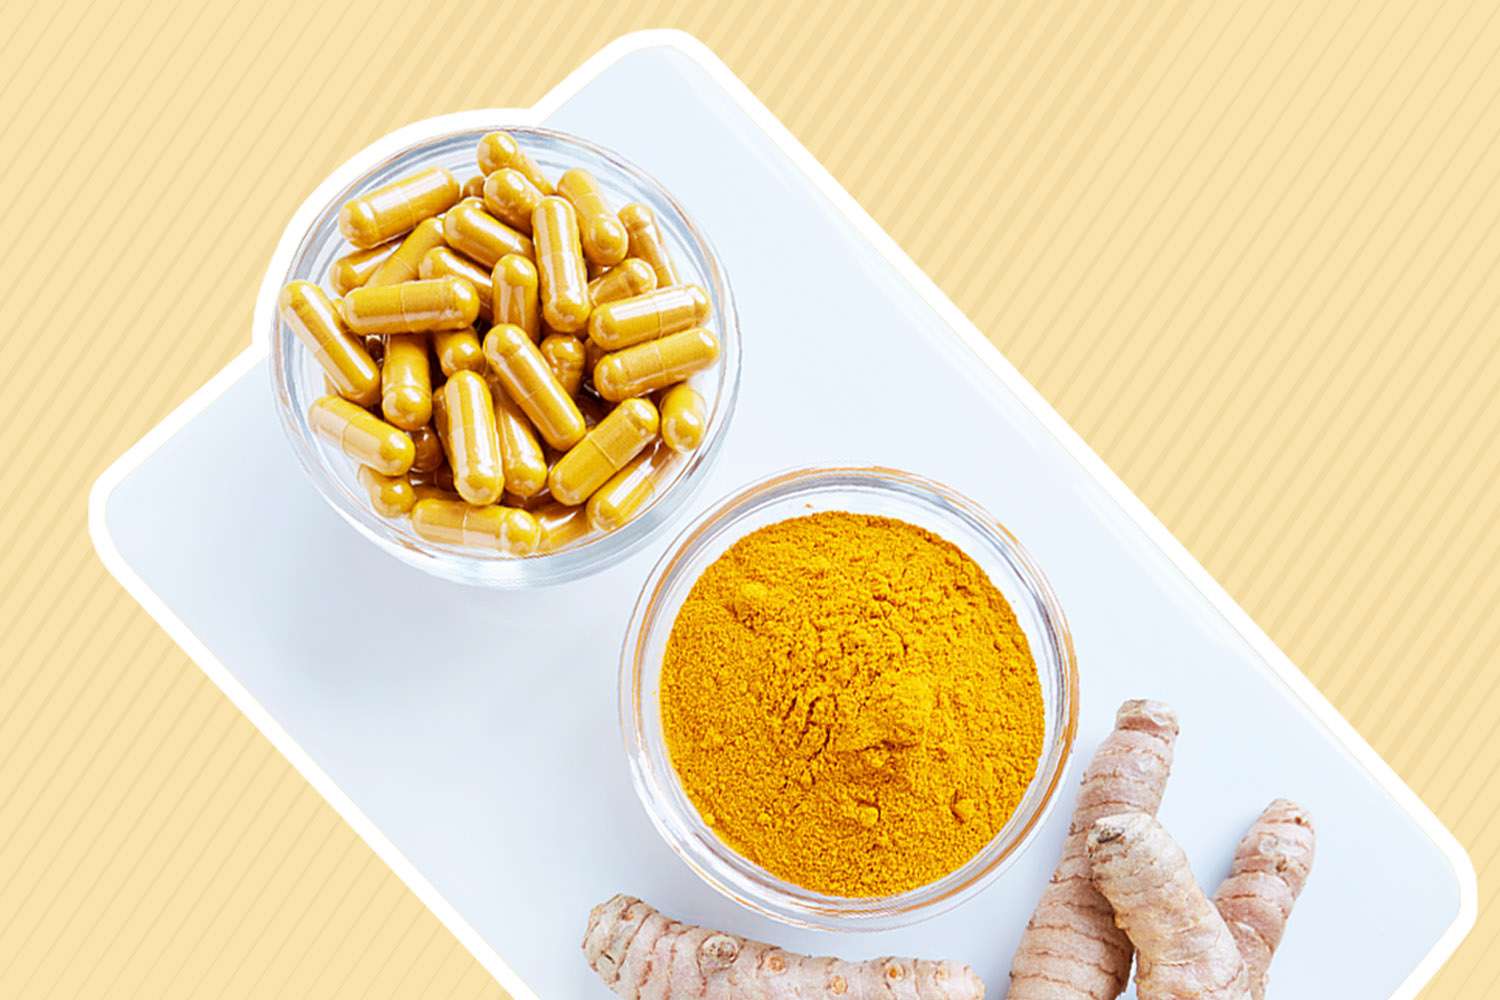 Turmeric supplements displayed on cutting board next to powdered and whole root turmeric collaged on a yellow background